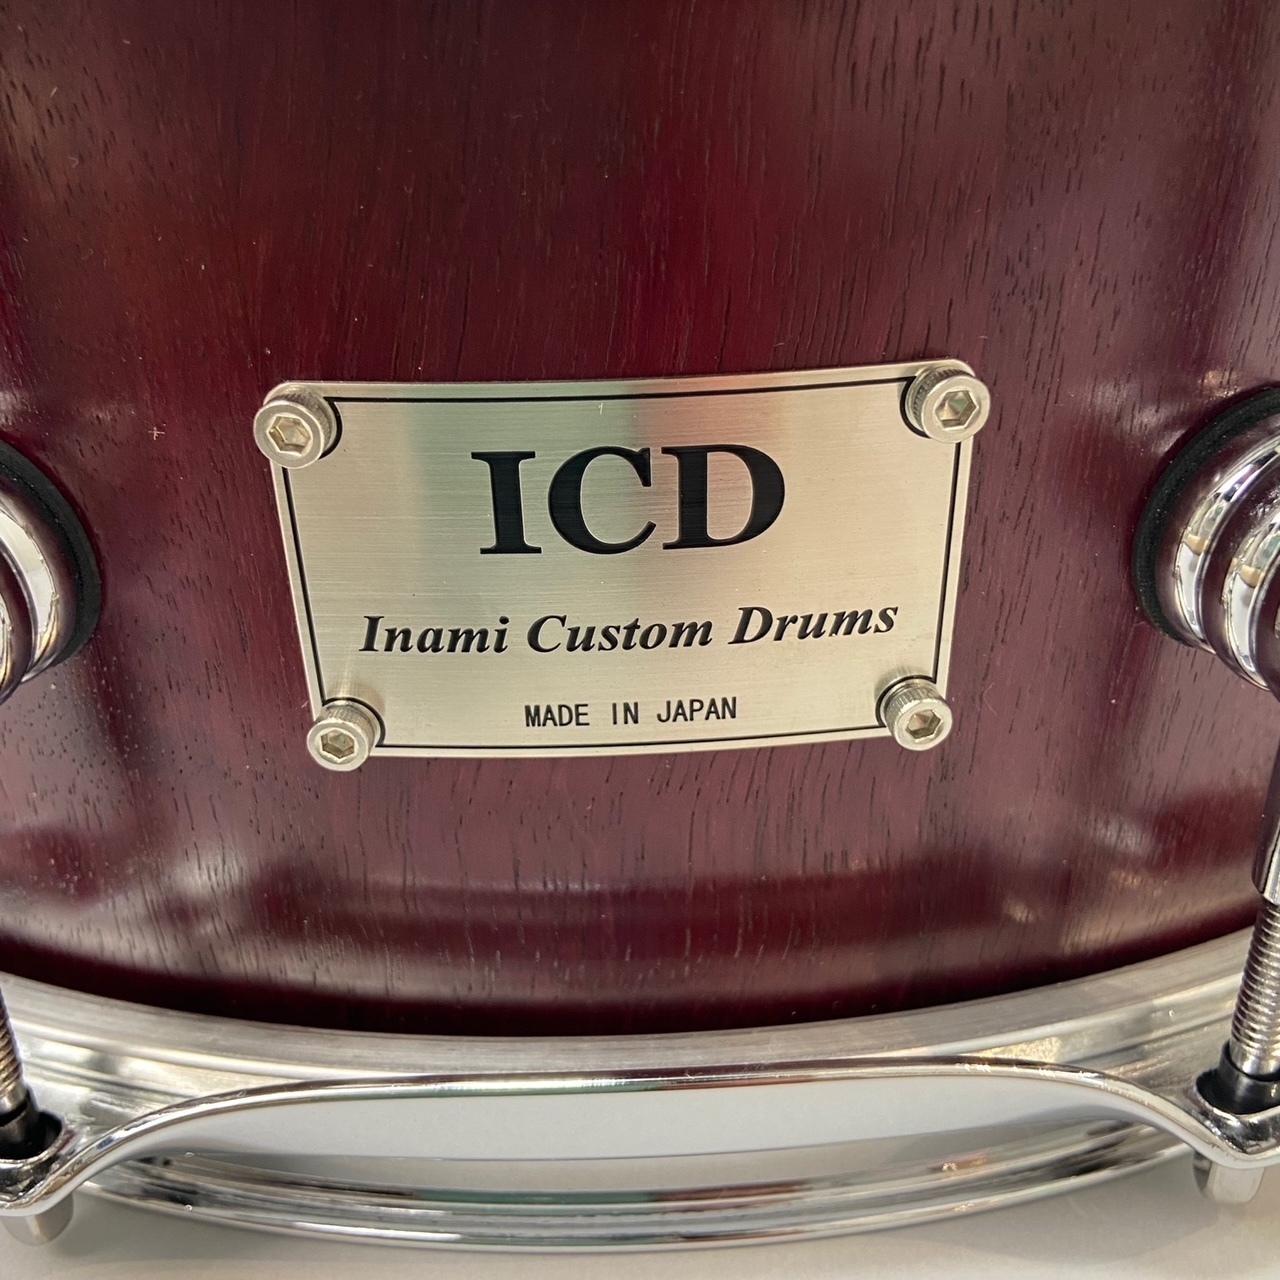 ICDInami Custom Drums Solid Purpleheart Stave Snare Drum "×5